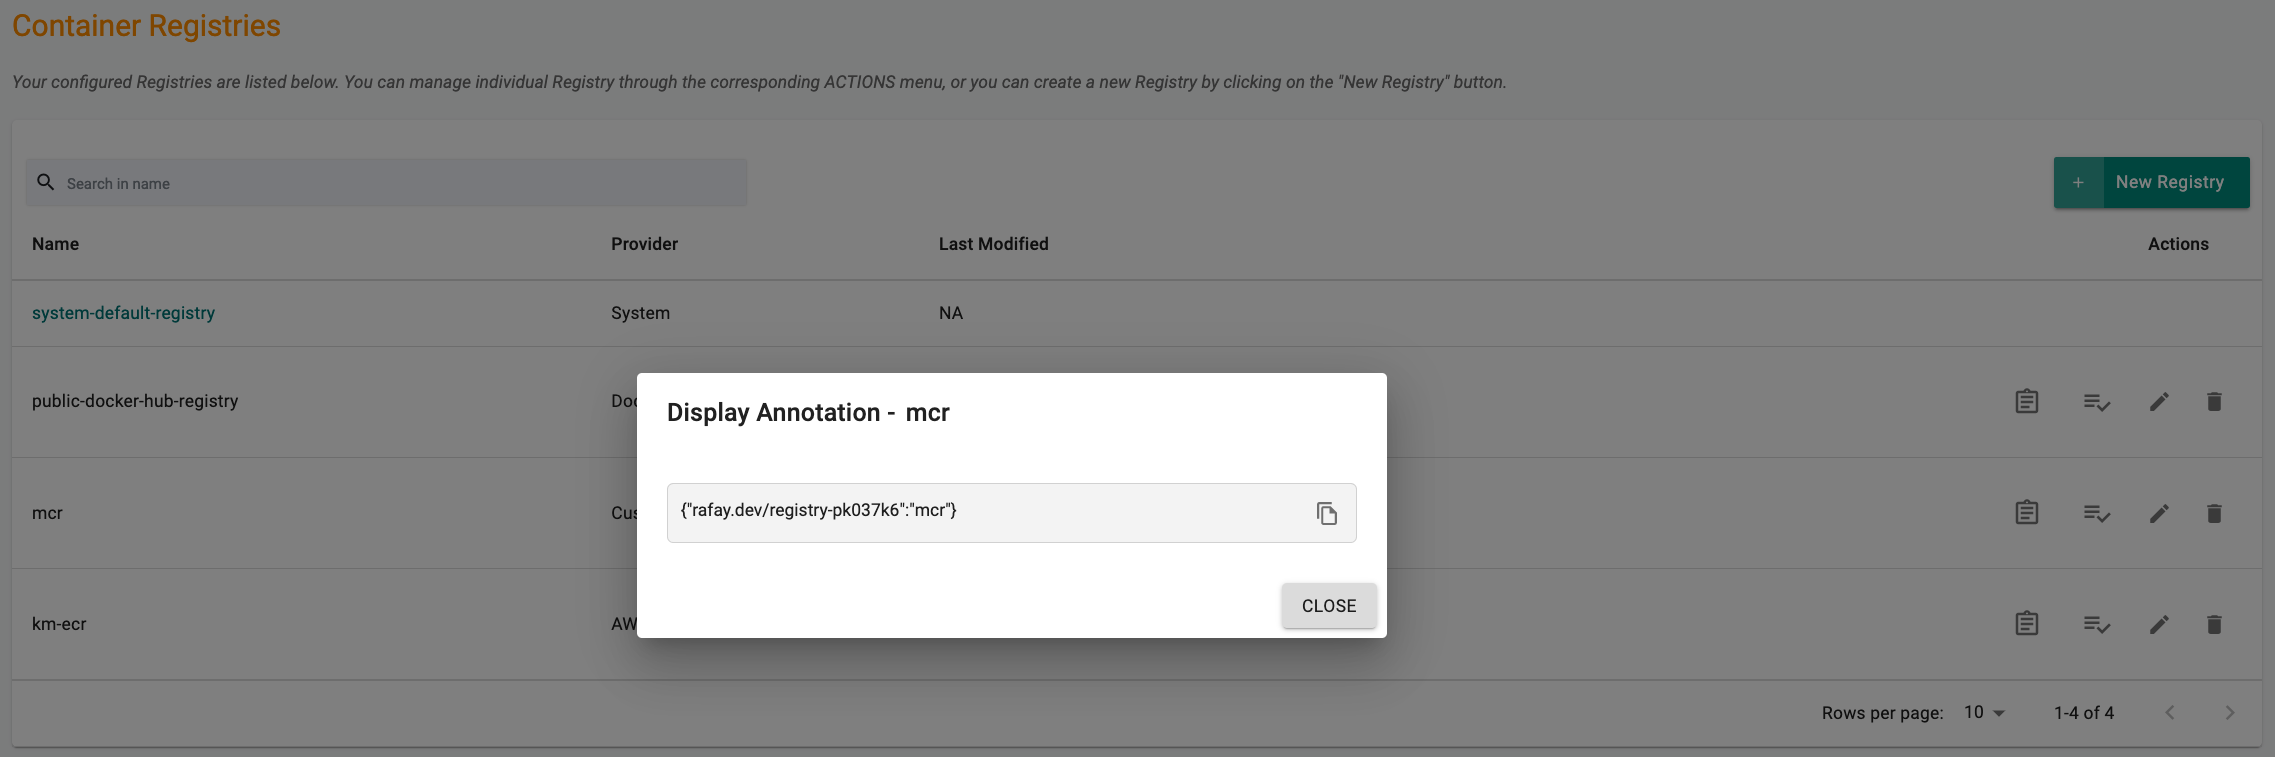 Annotations for Registry